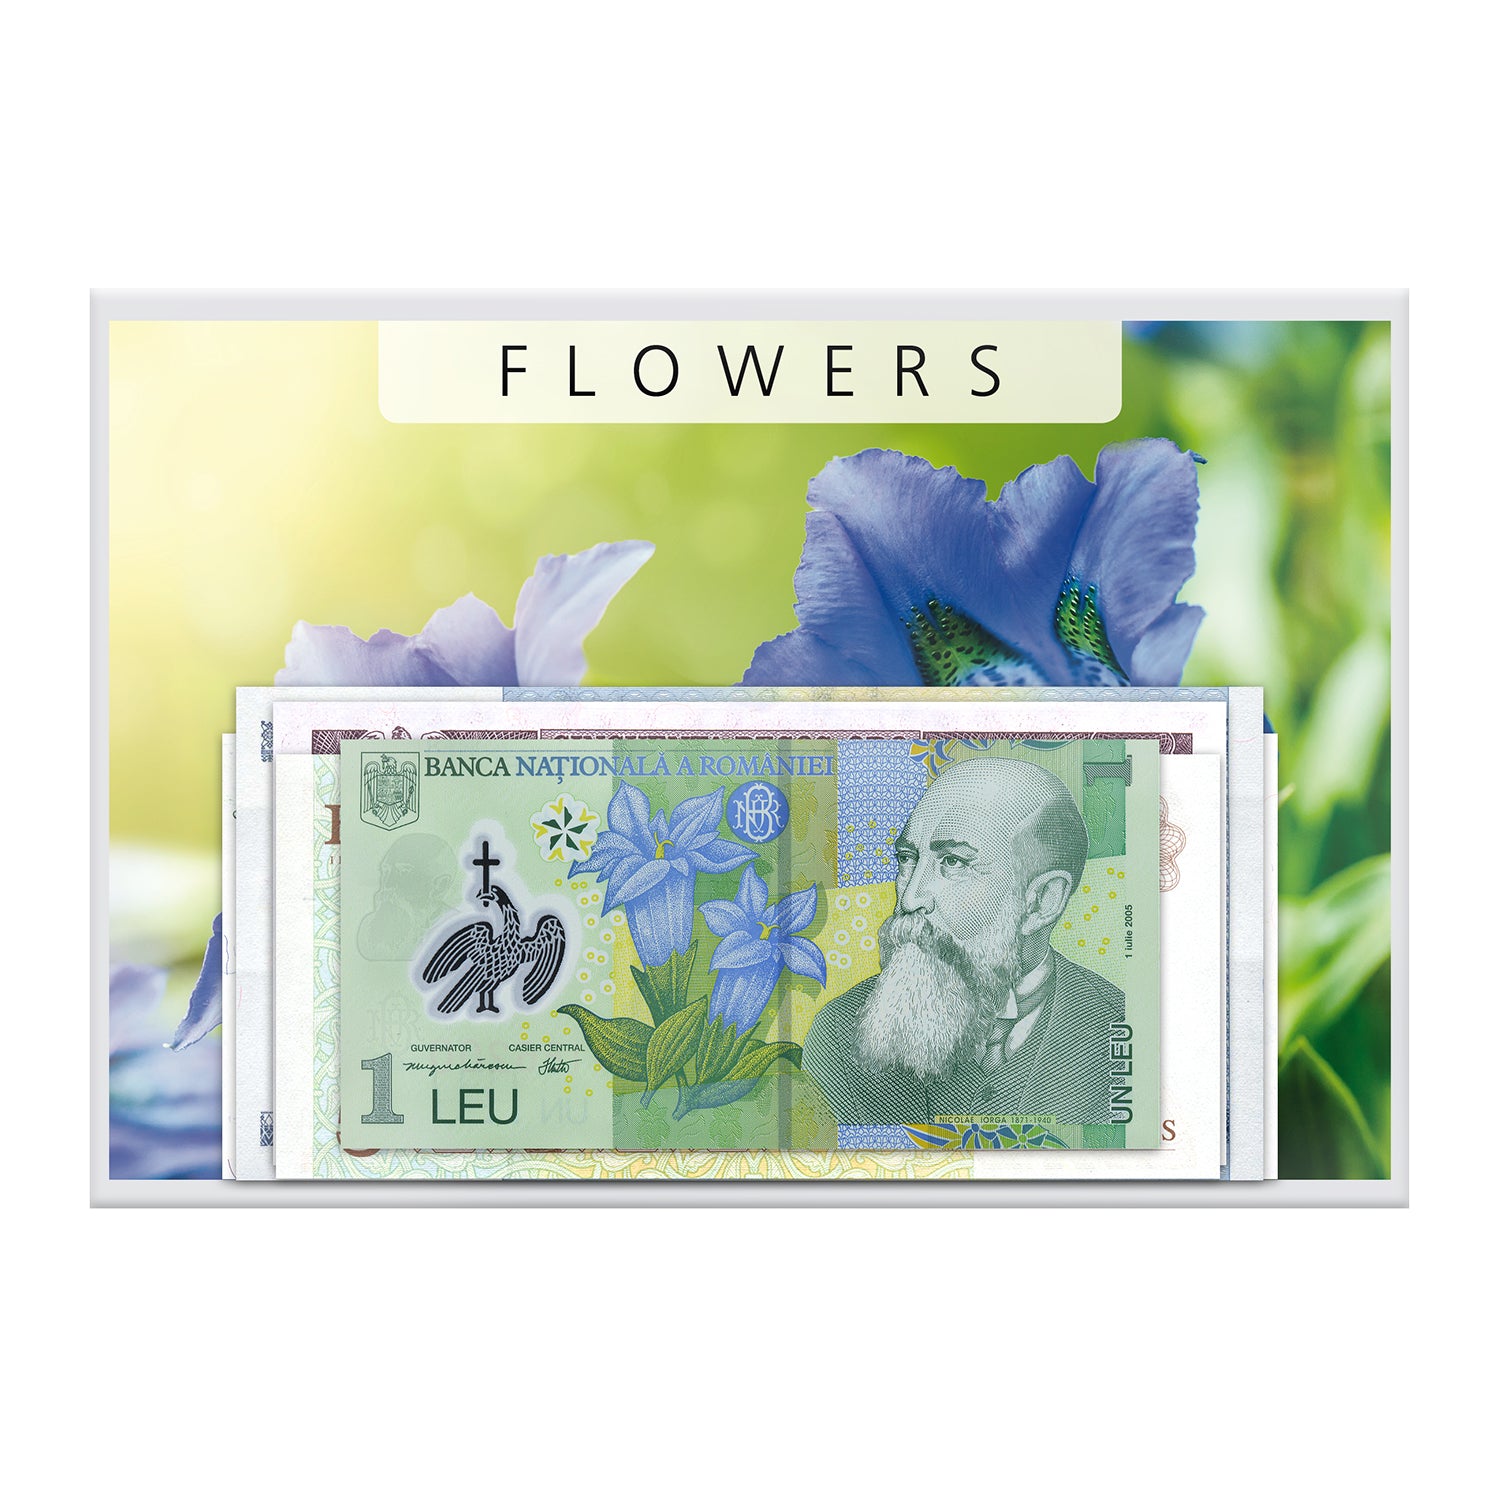 Banknote Collection "Flowers II"